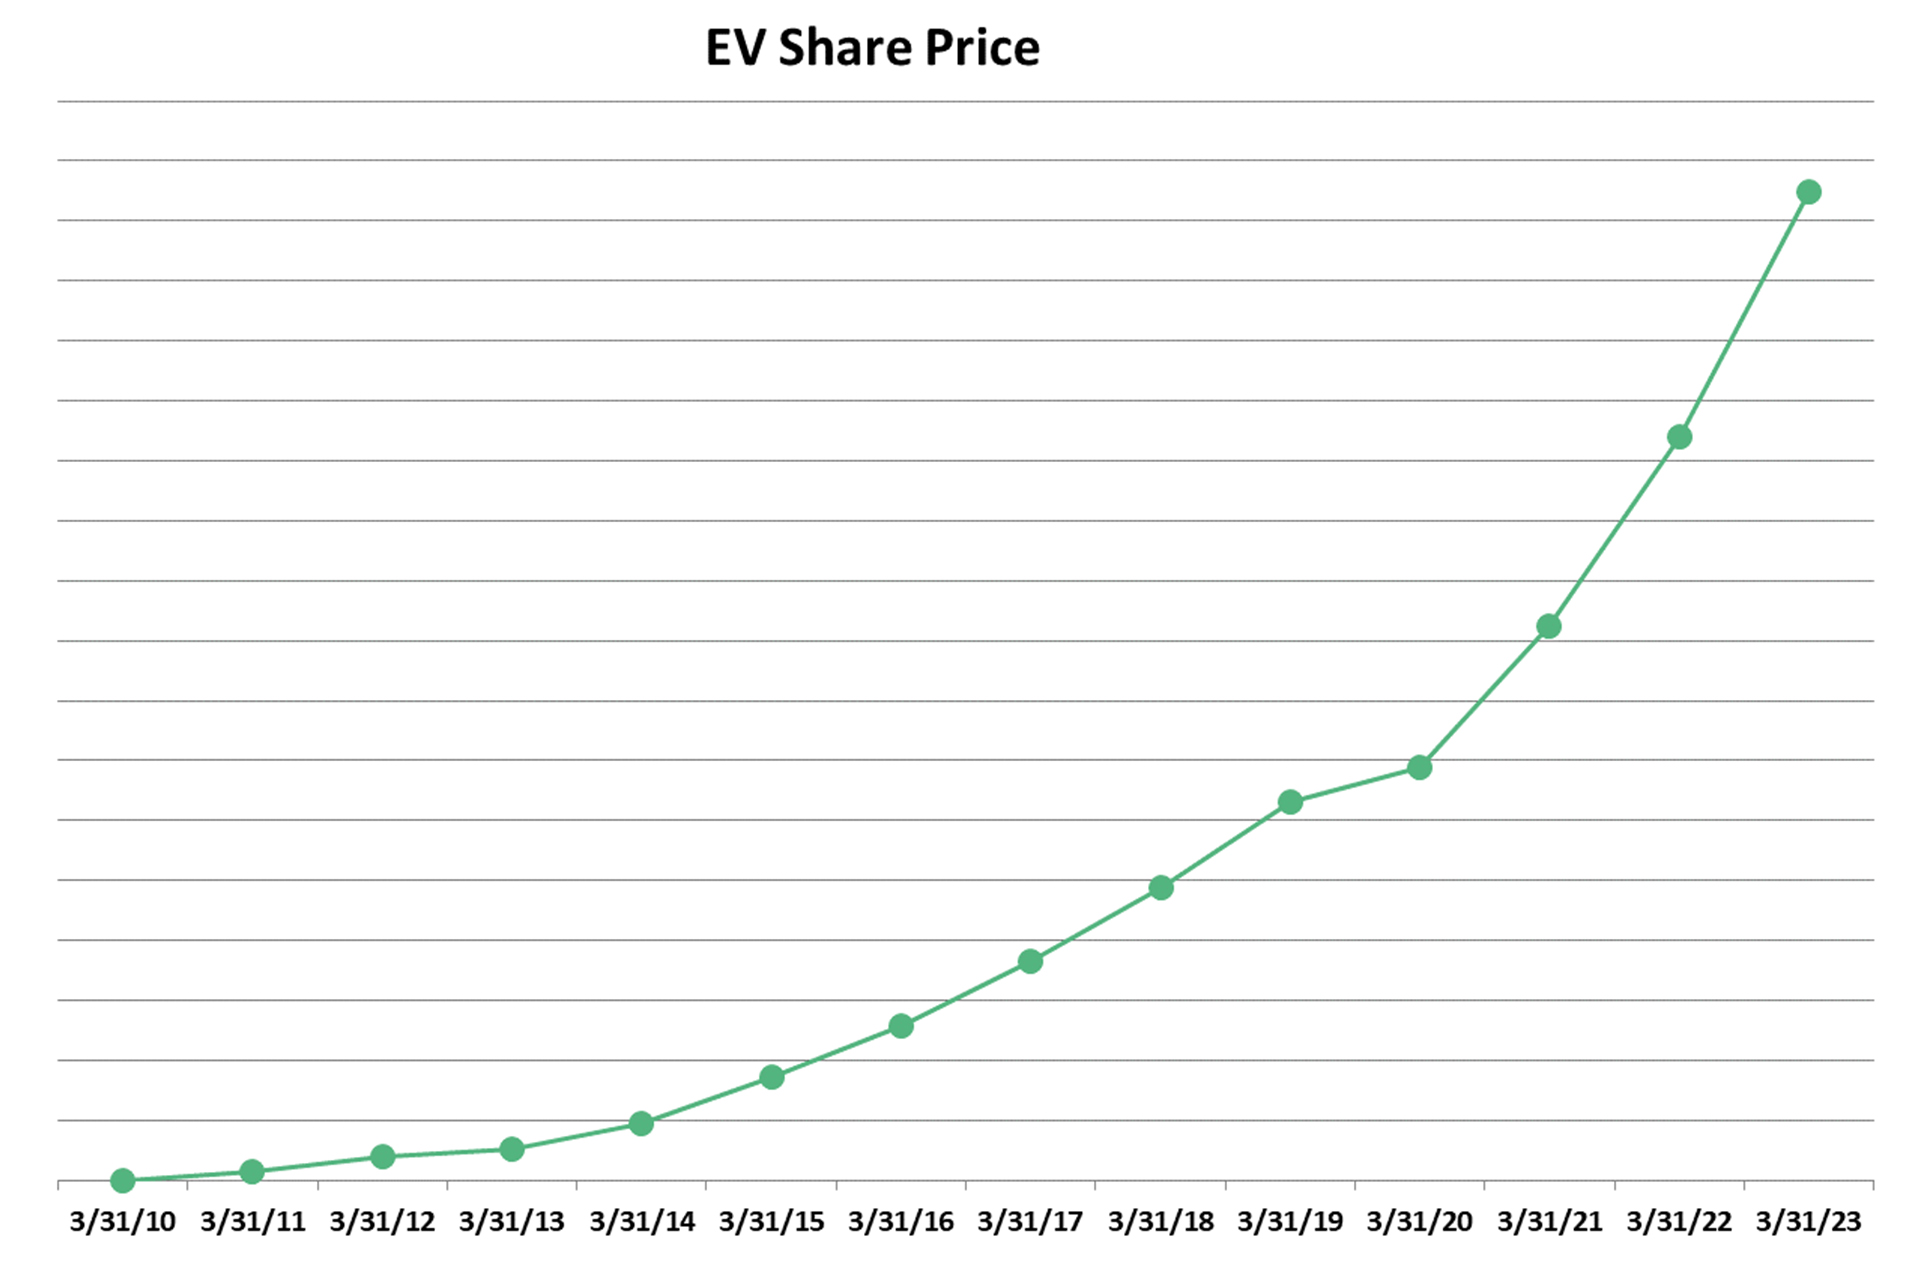 This image shows a chart that demonstrates the upward trajectory of shares of Empowered Ventures employee owner stock over time.